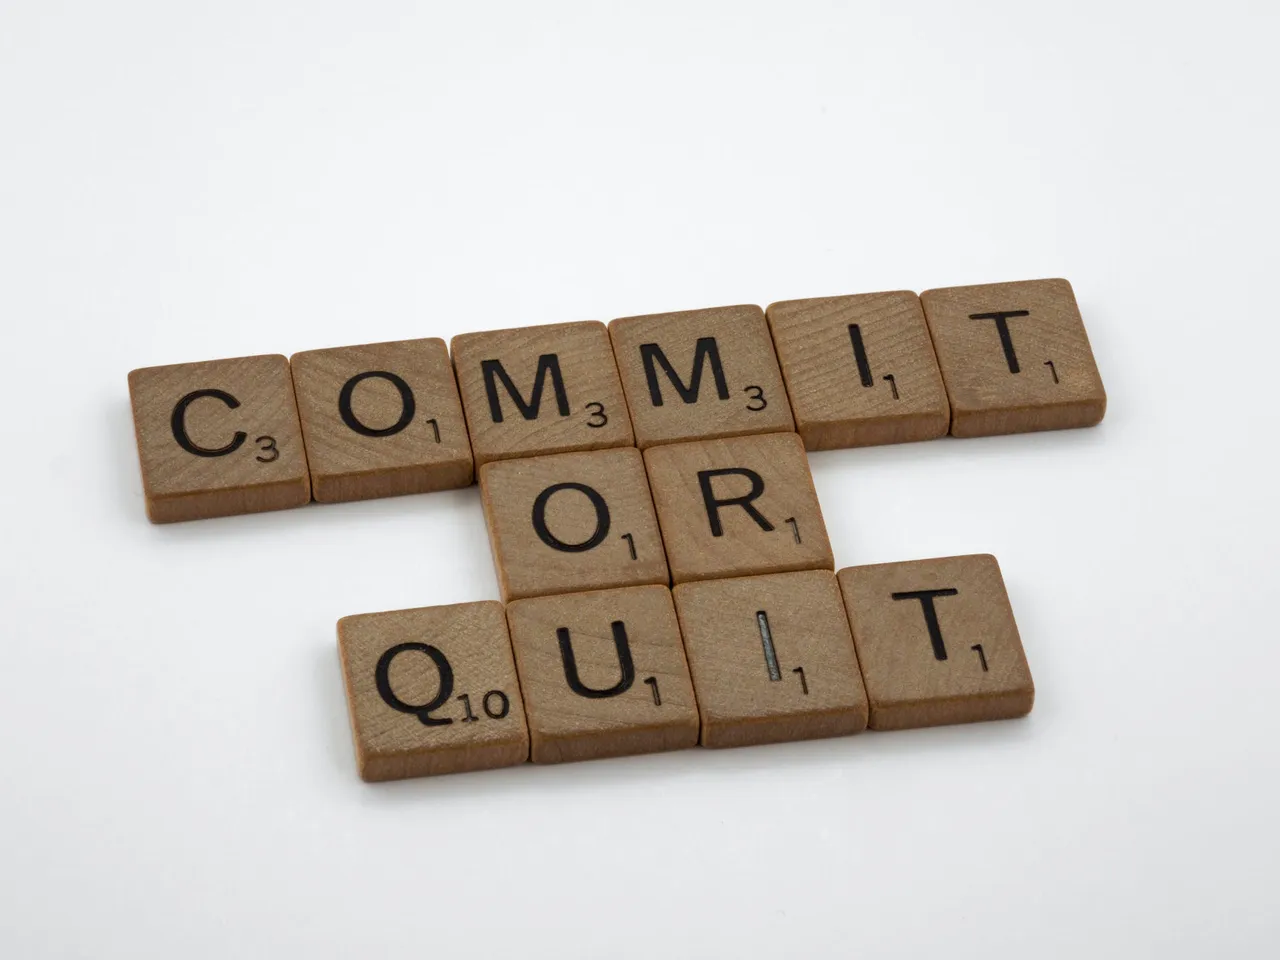 Commit or Quit?